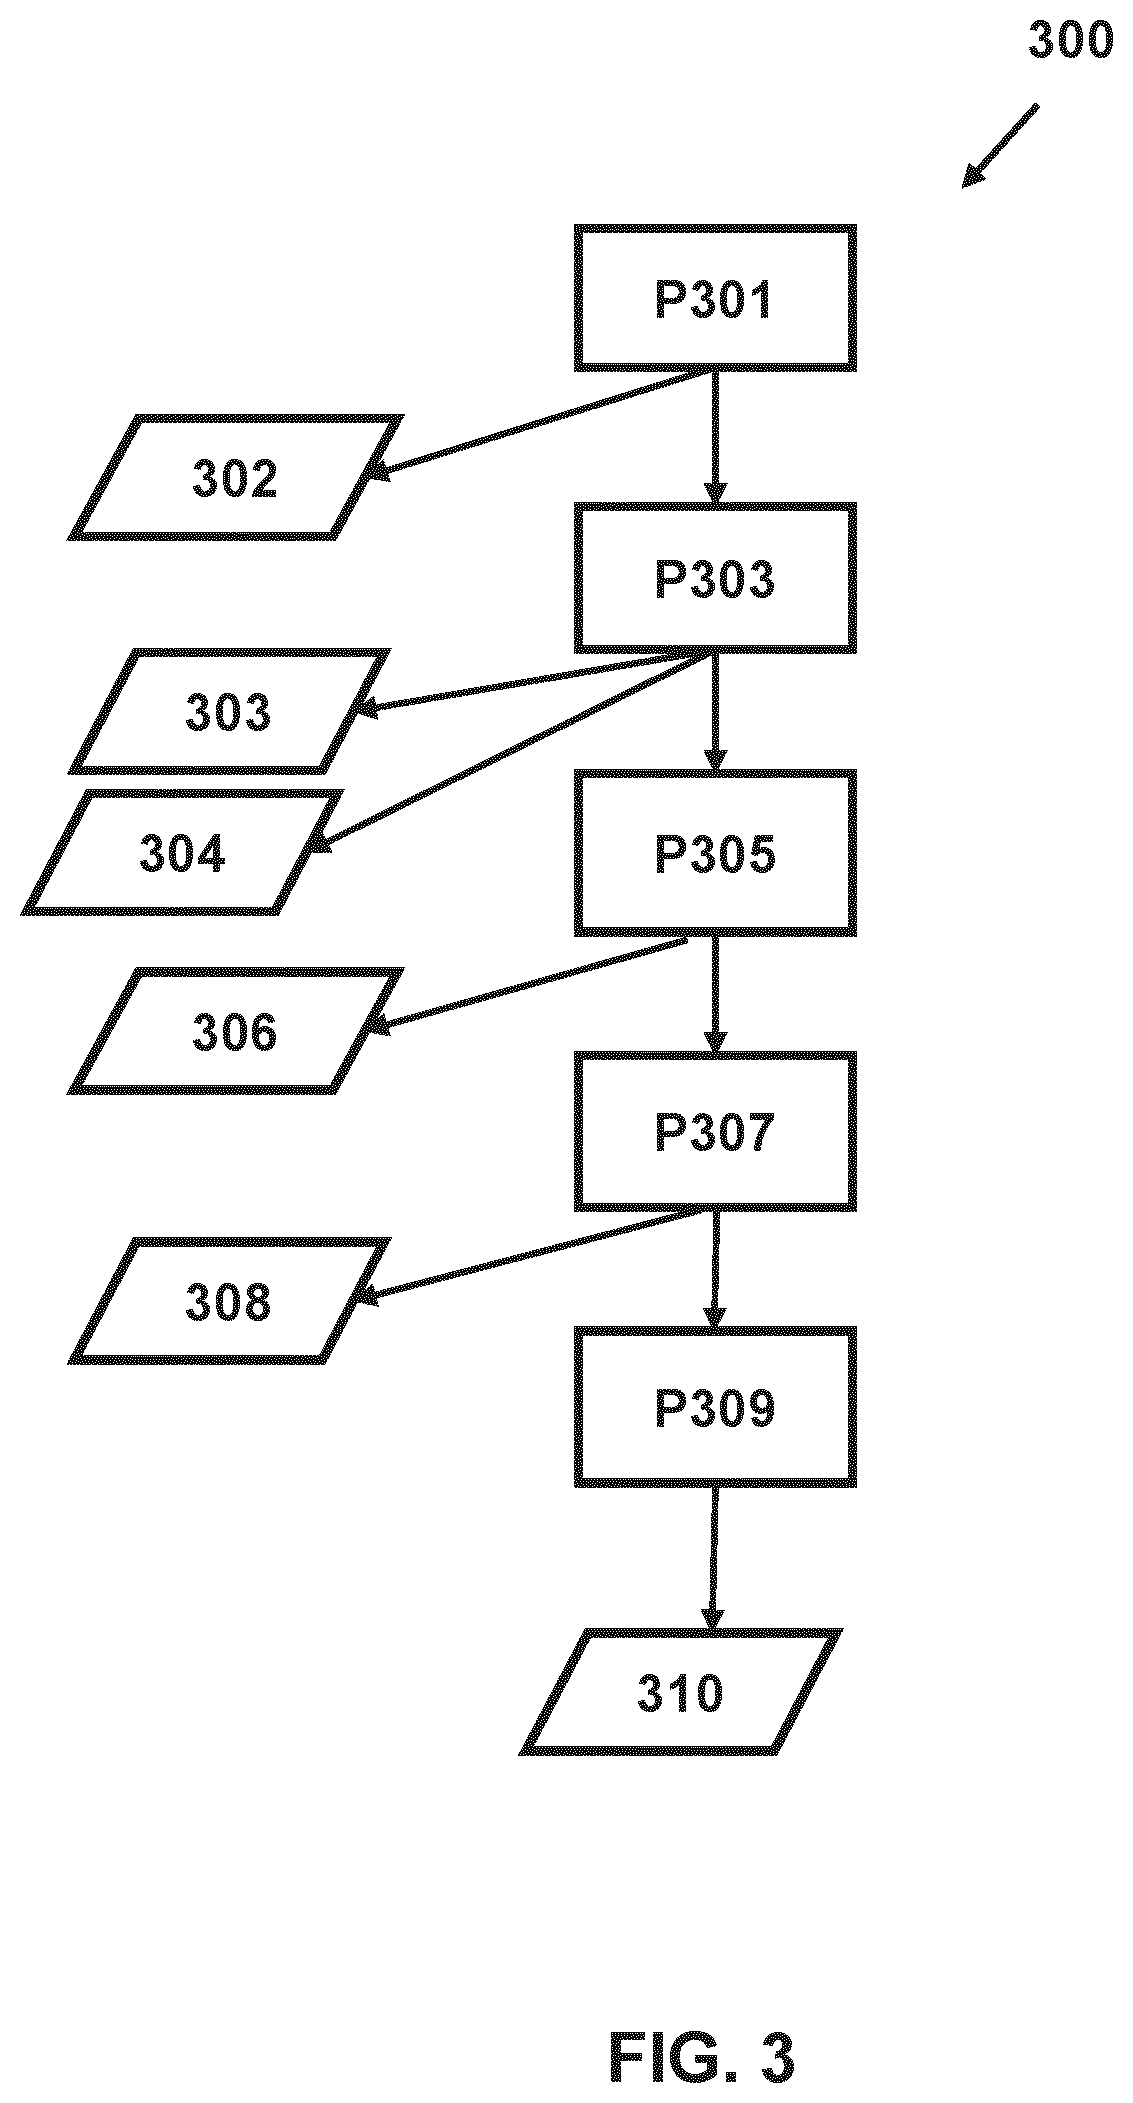 Method of determining characteristic of patterning process based on defect for reducing hotspot